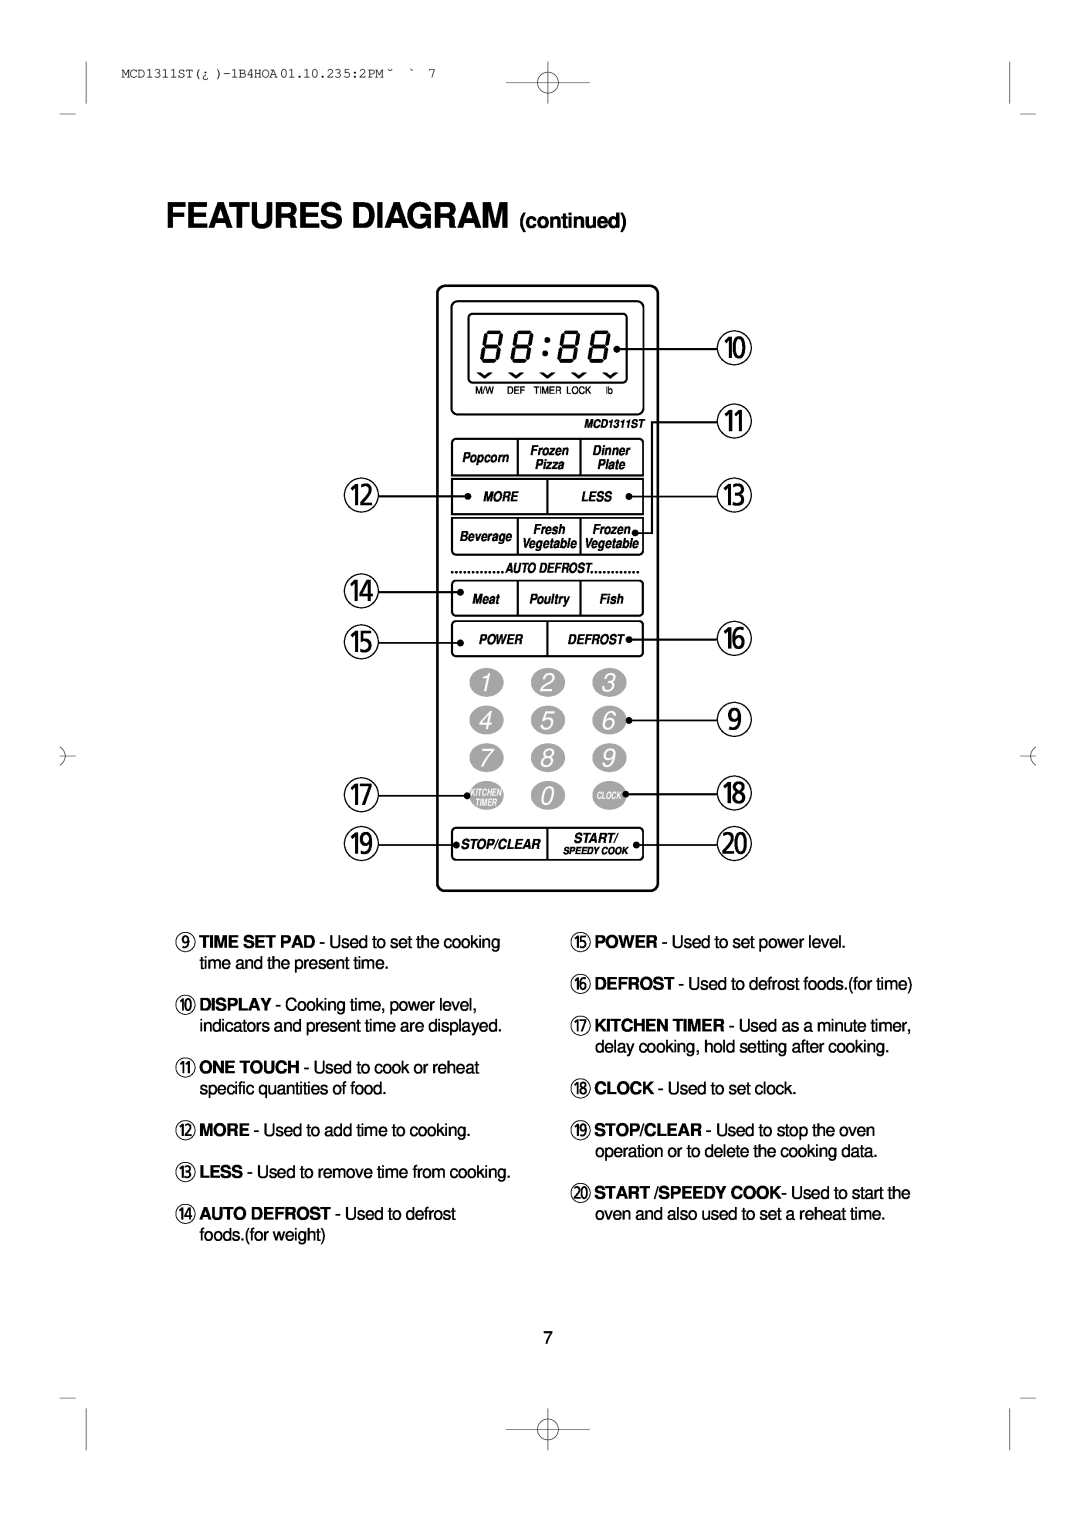 Magic Chef MCD1311ST manual FEATURES DIAGRAM continued, r AUTO DEFROST - Used to defrost foods.for weight, q e y 